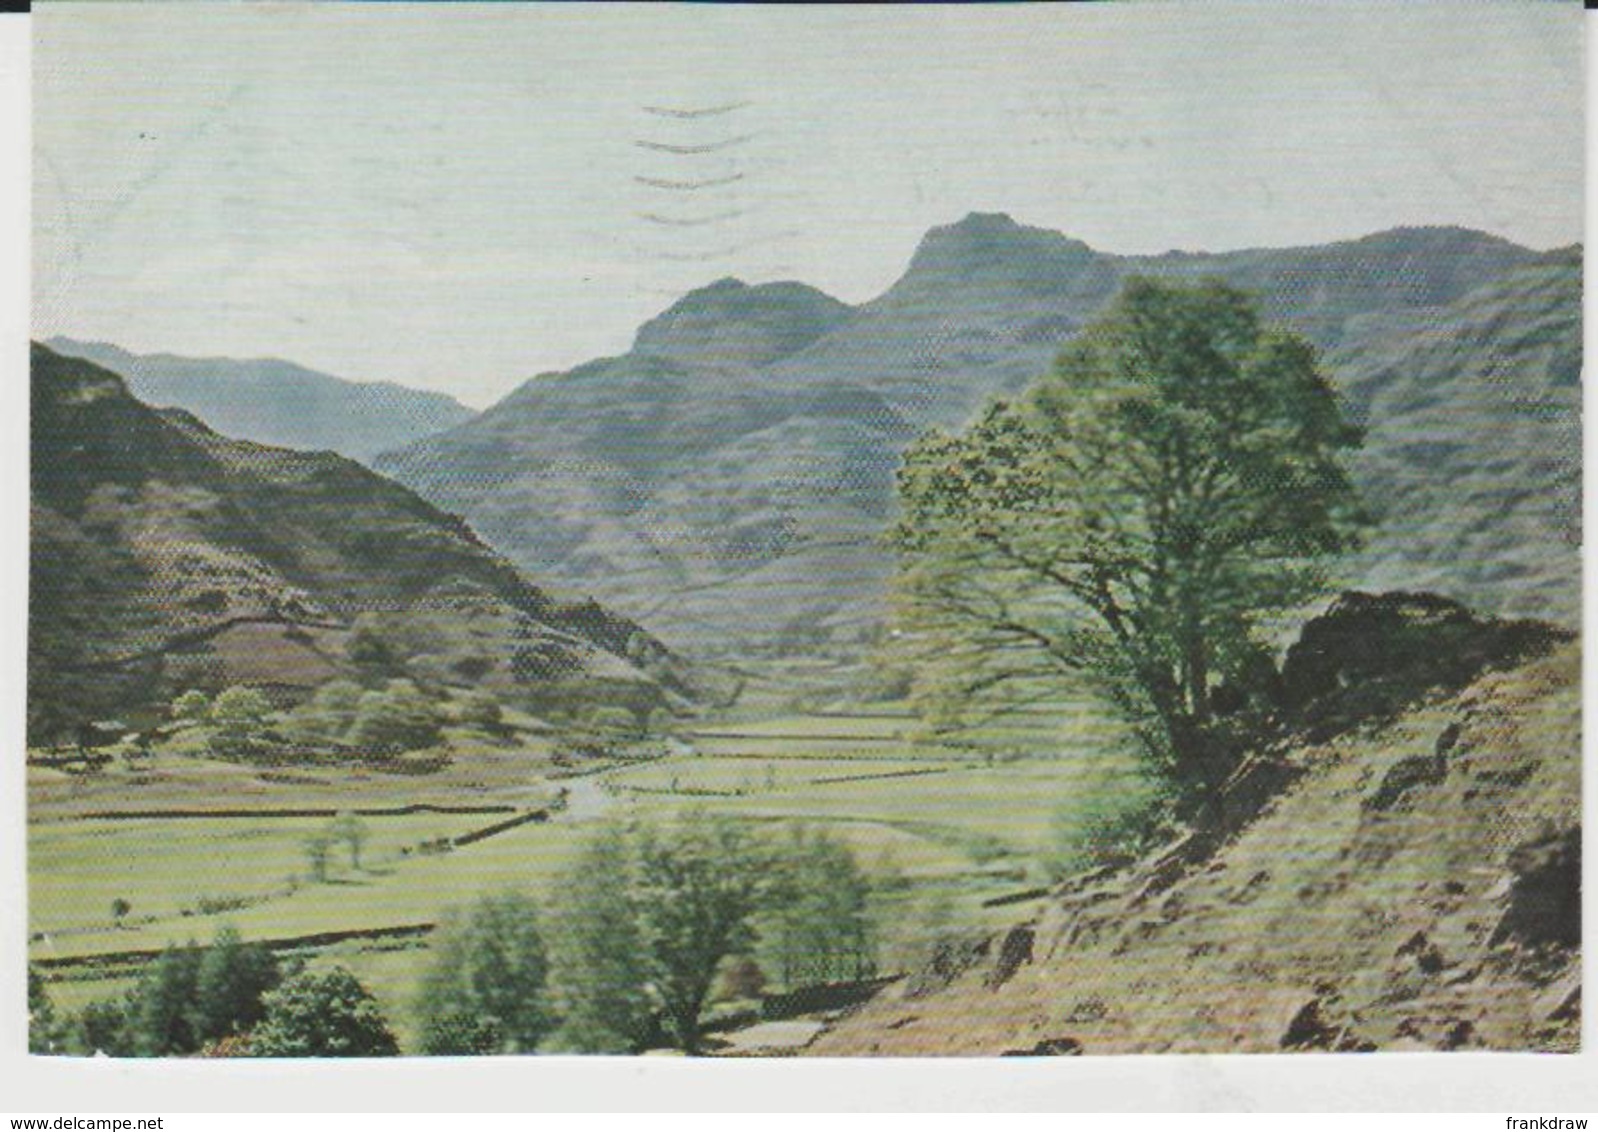 Postcard - Langdale Valley, Card No..nc12.  - Posted 10th July 1956 Very Good - Unclassified